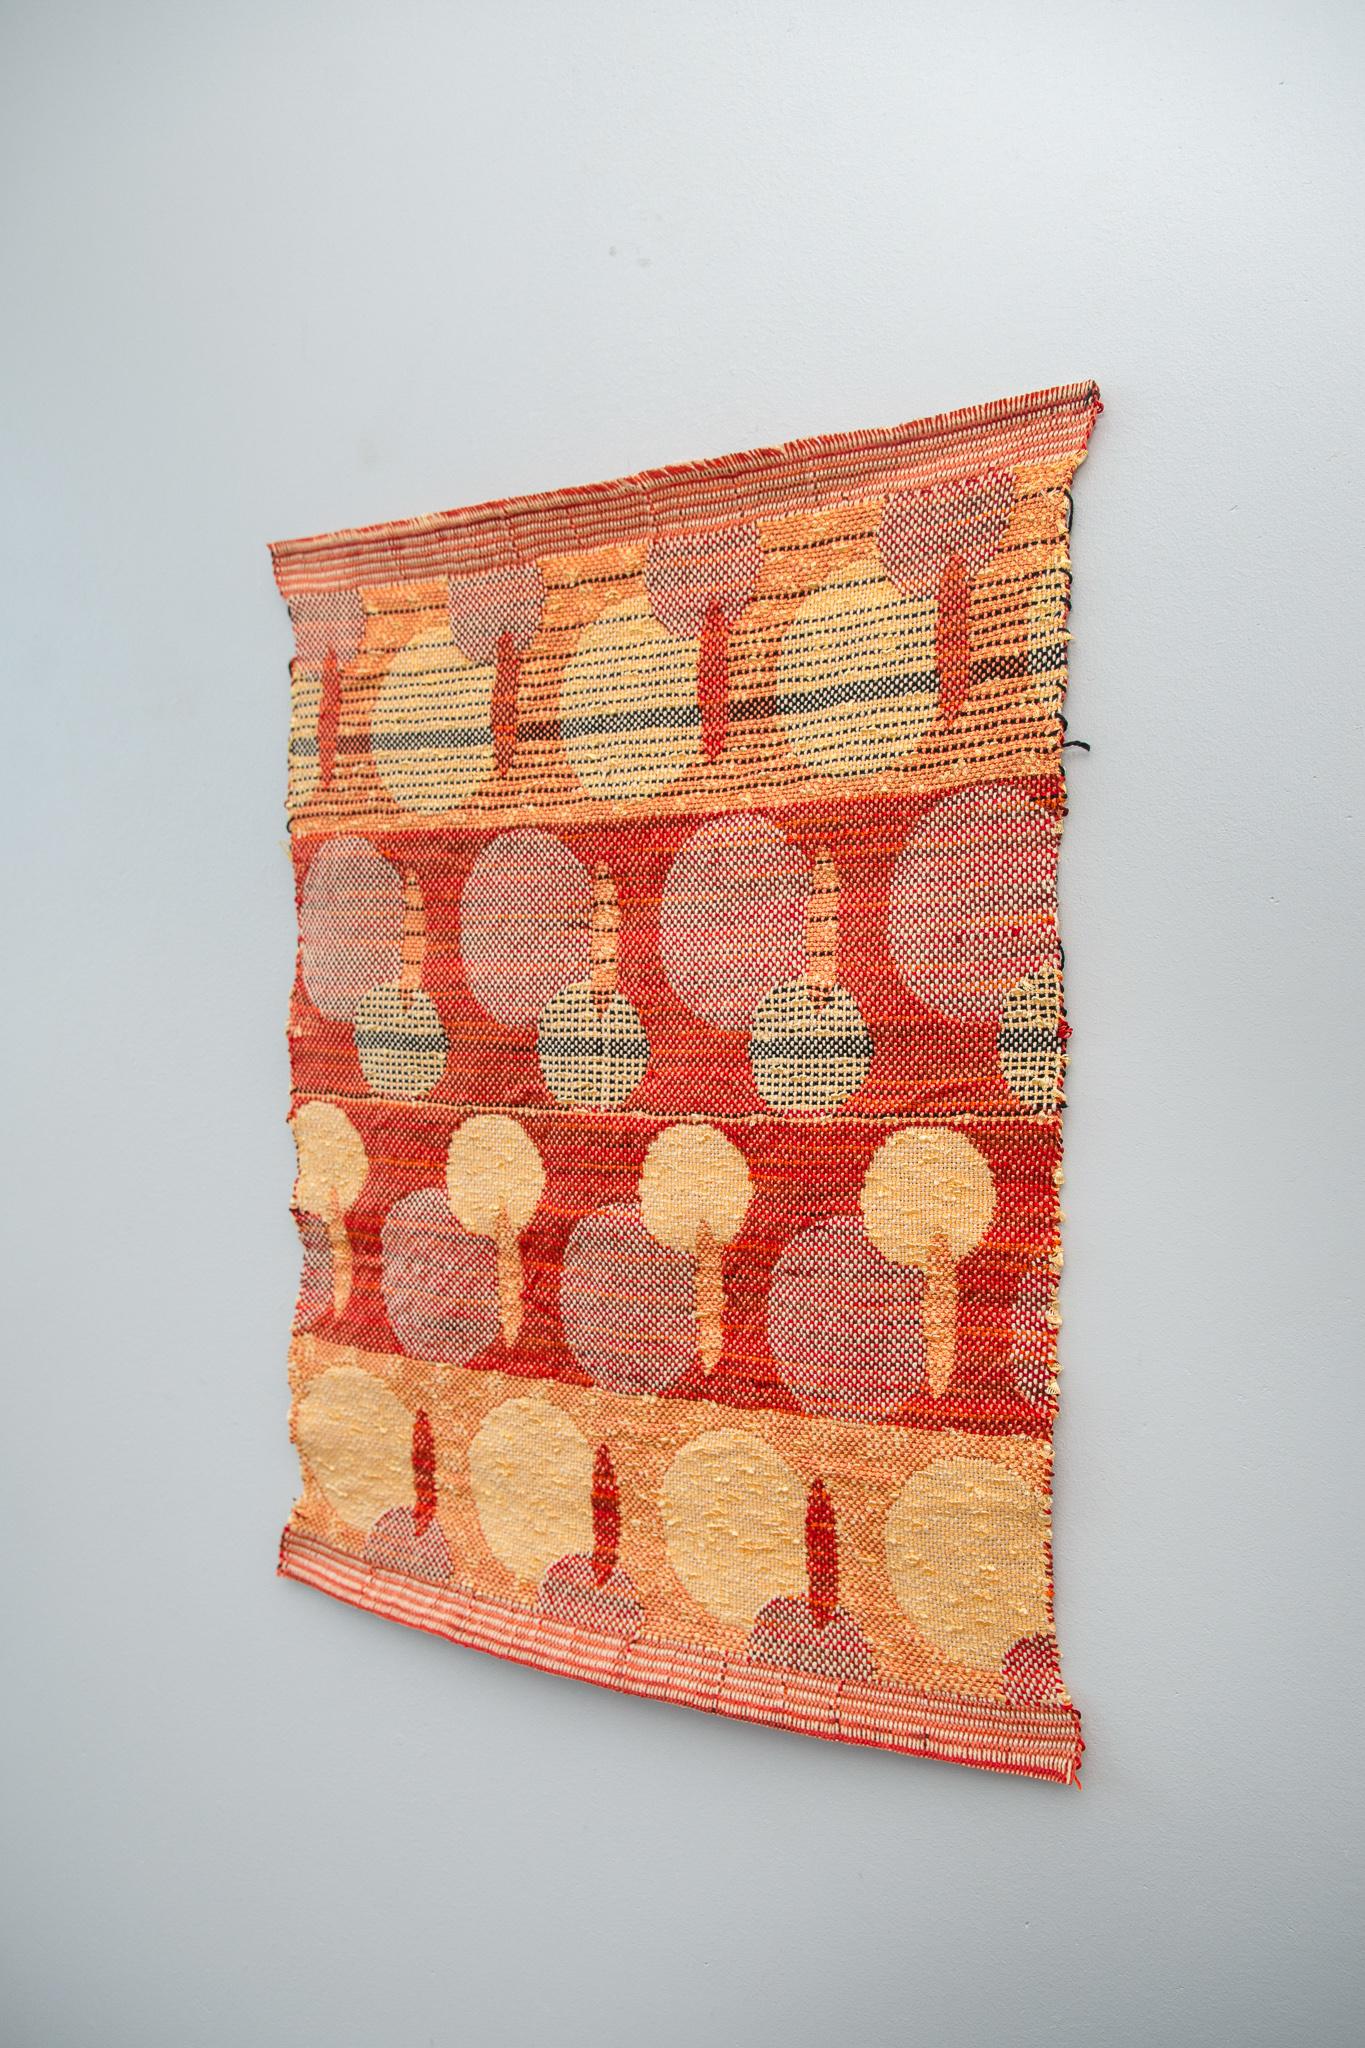 Sample 5: Double Weave, 2014. Cotton Perle 5/2 Silk 5/2 Jacquard TC1 Woven, 465 x 345mm

Born in Namibia, Lynette Diergaardt received her Bachelors of Art from the University of Namibia and her Masters in Textiles as a Fulbright Scholar at Kent